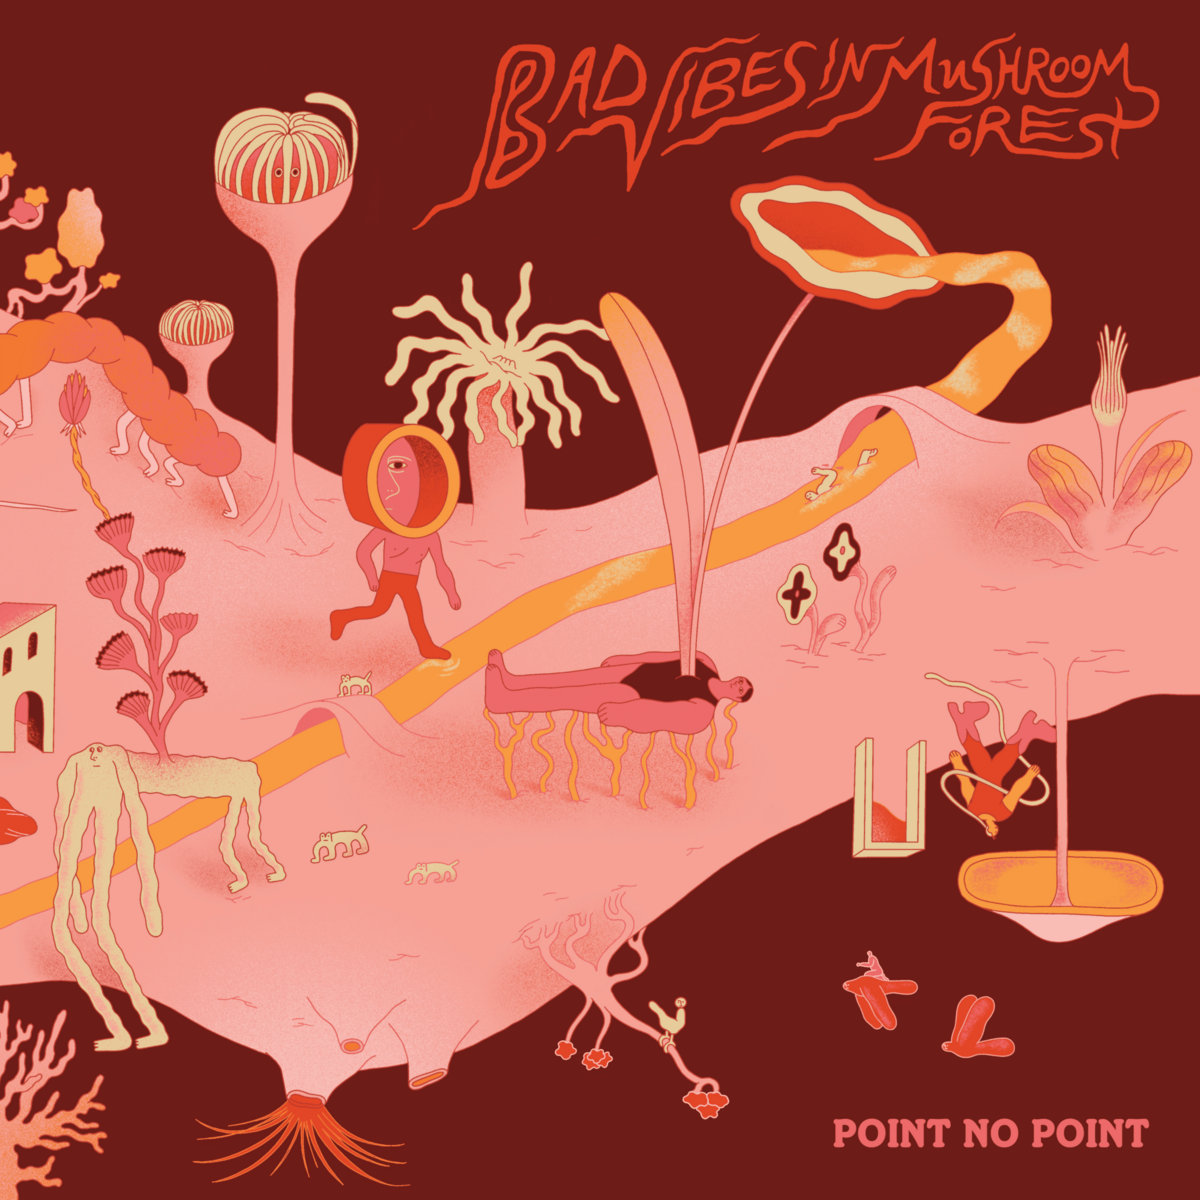 point no point bad vibes mushroom forest - surreal illustration showing fungi-like characters in pinks and oranges